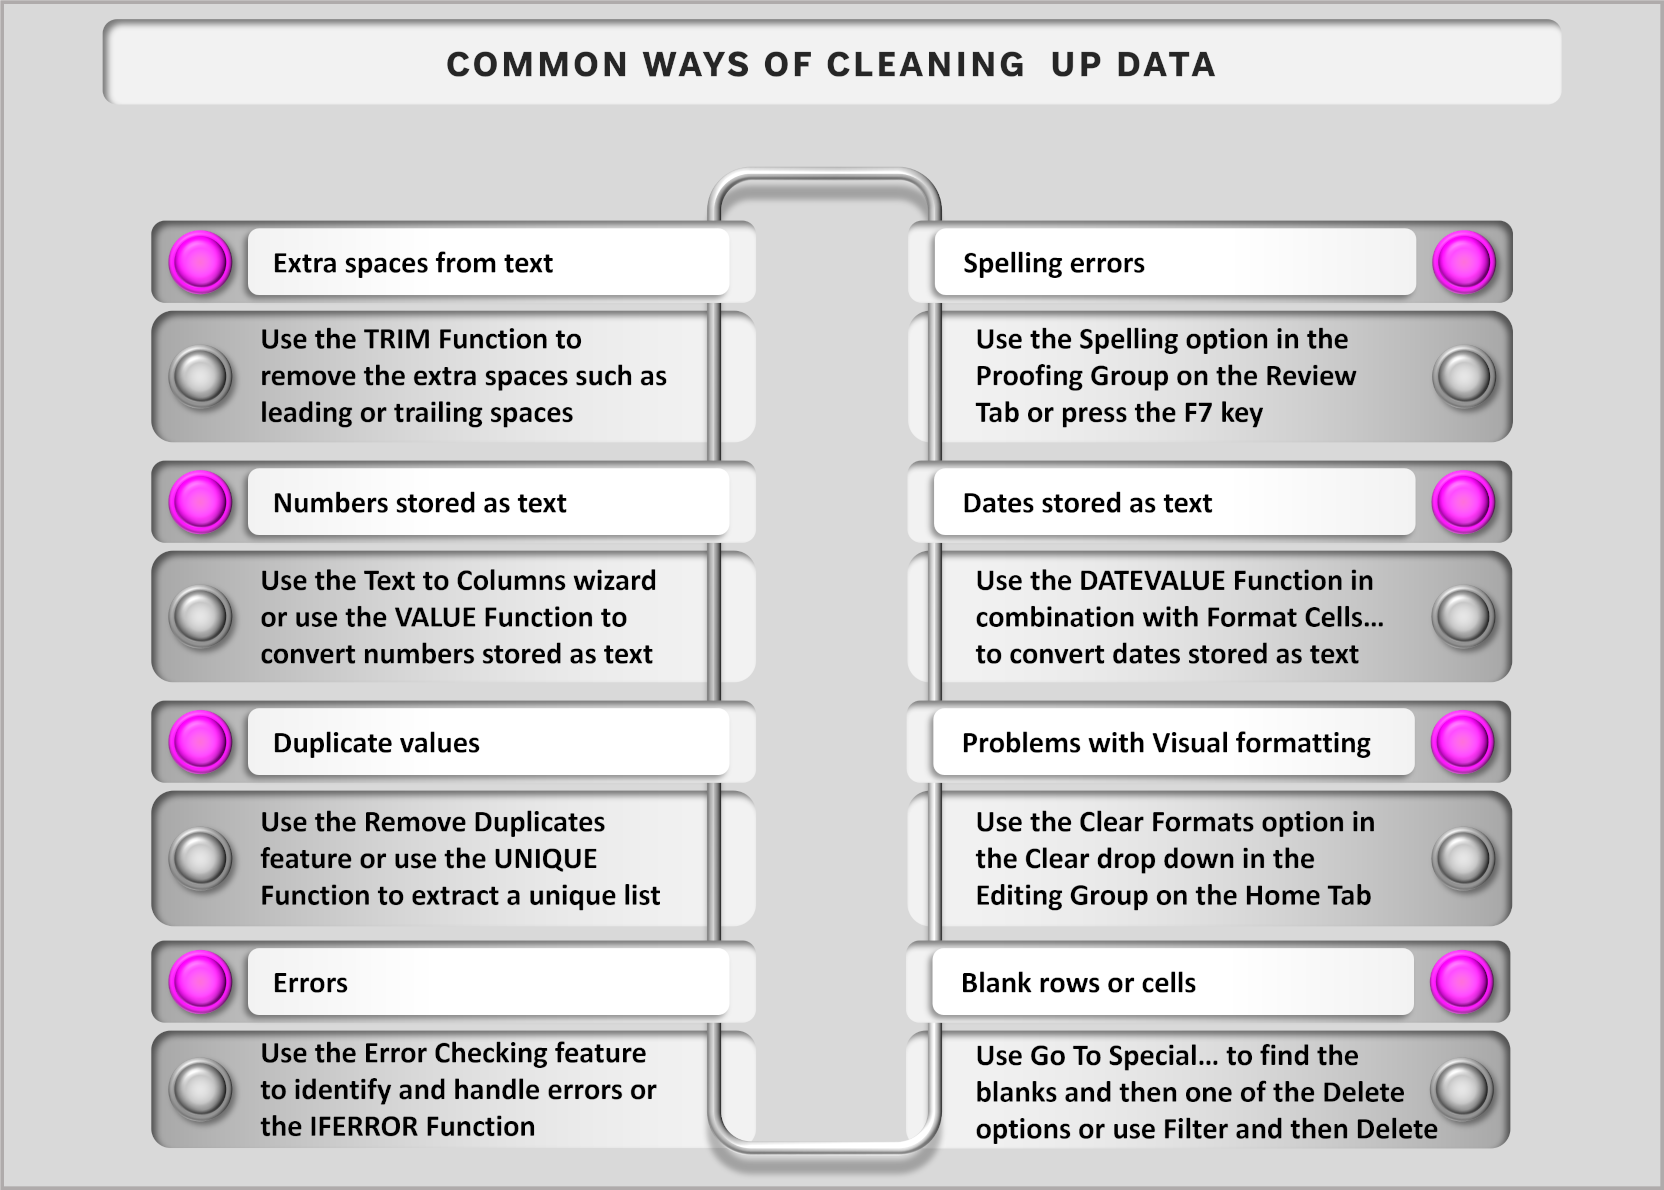 An Infographic reviewing the common ways of cleaning up data in Excel.